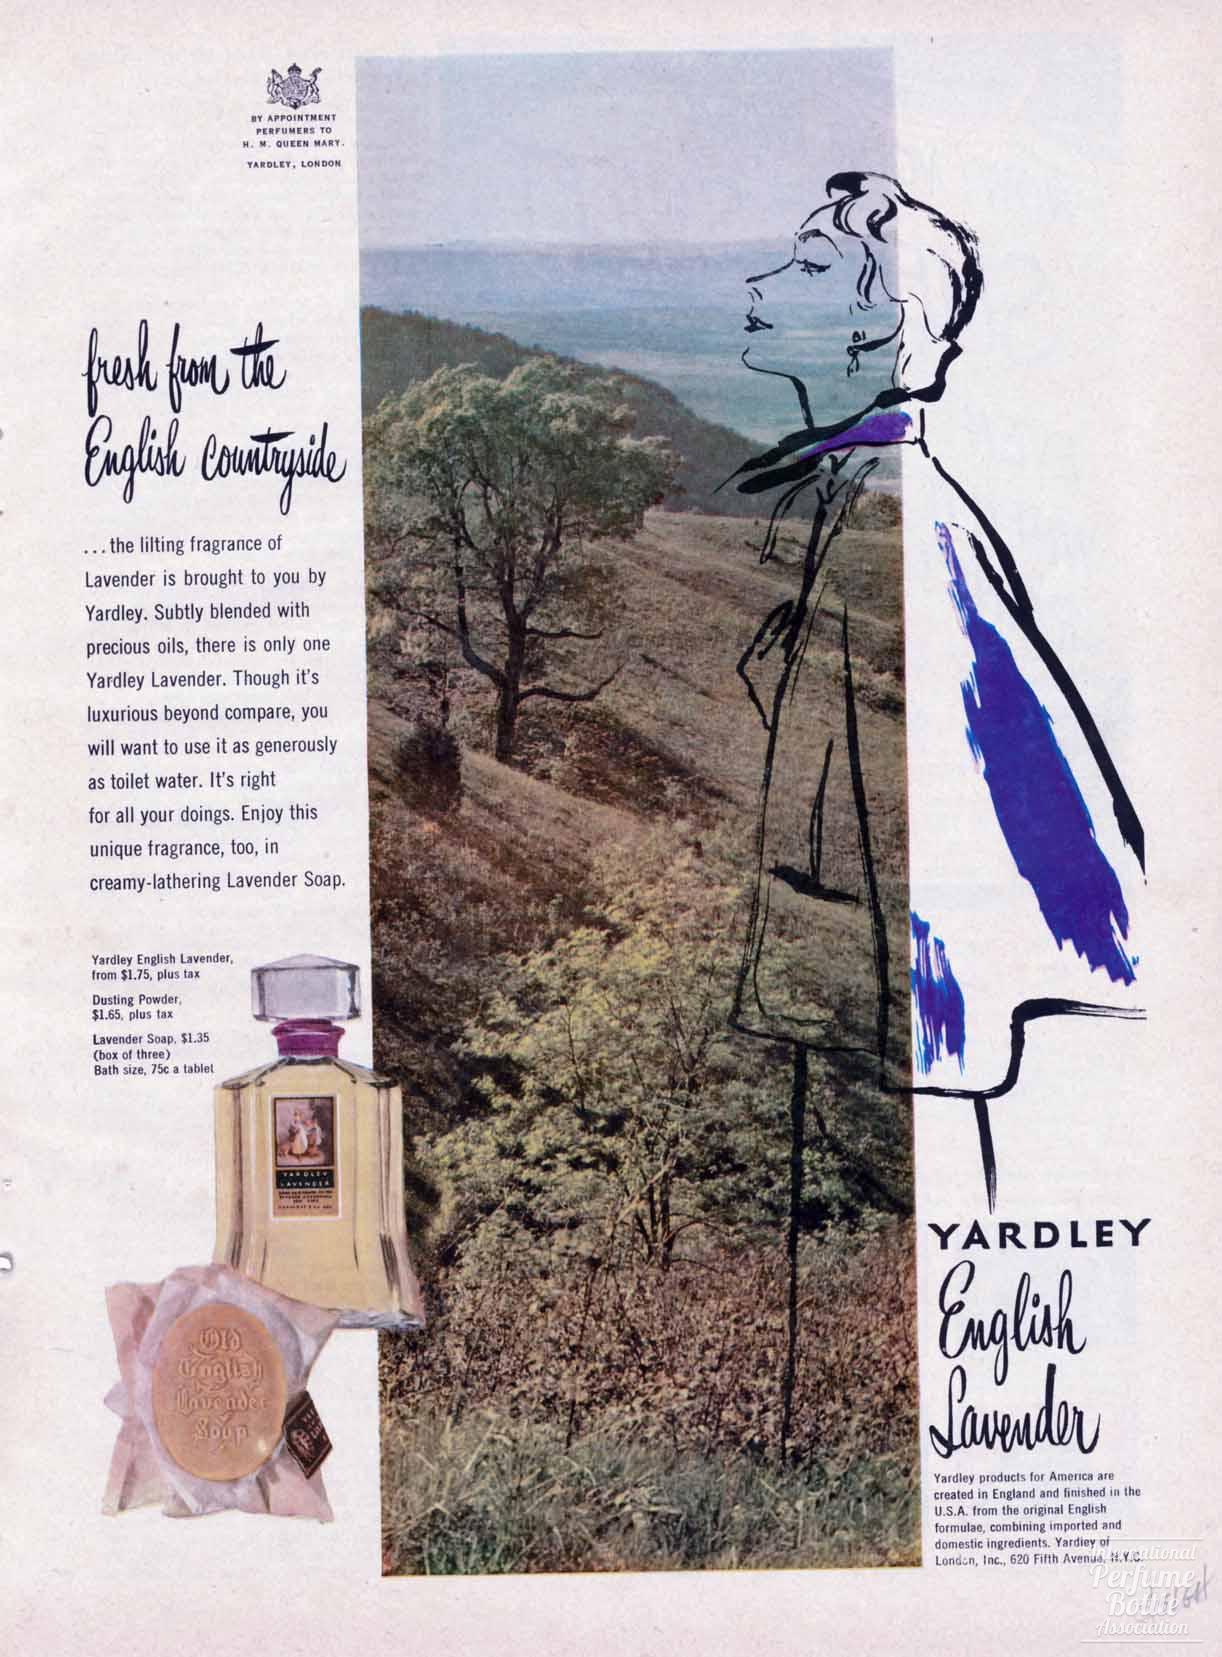 "Old English Lavender" by Yardley Advertisement - 1951